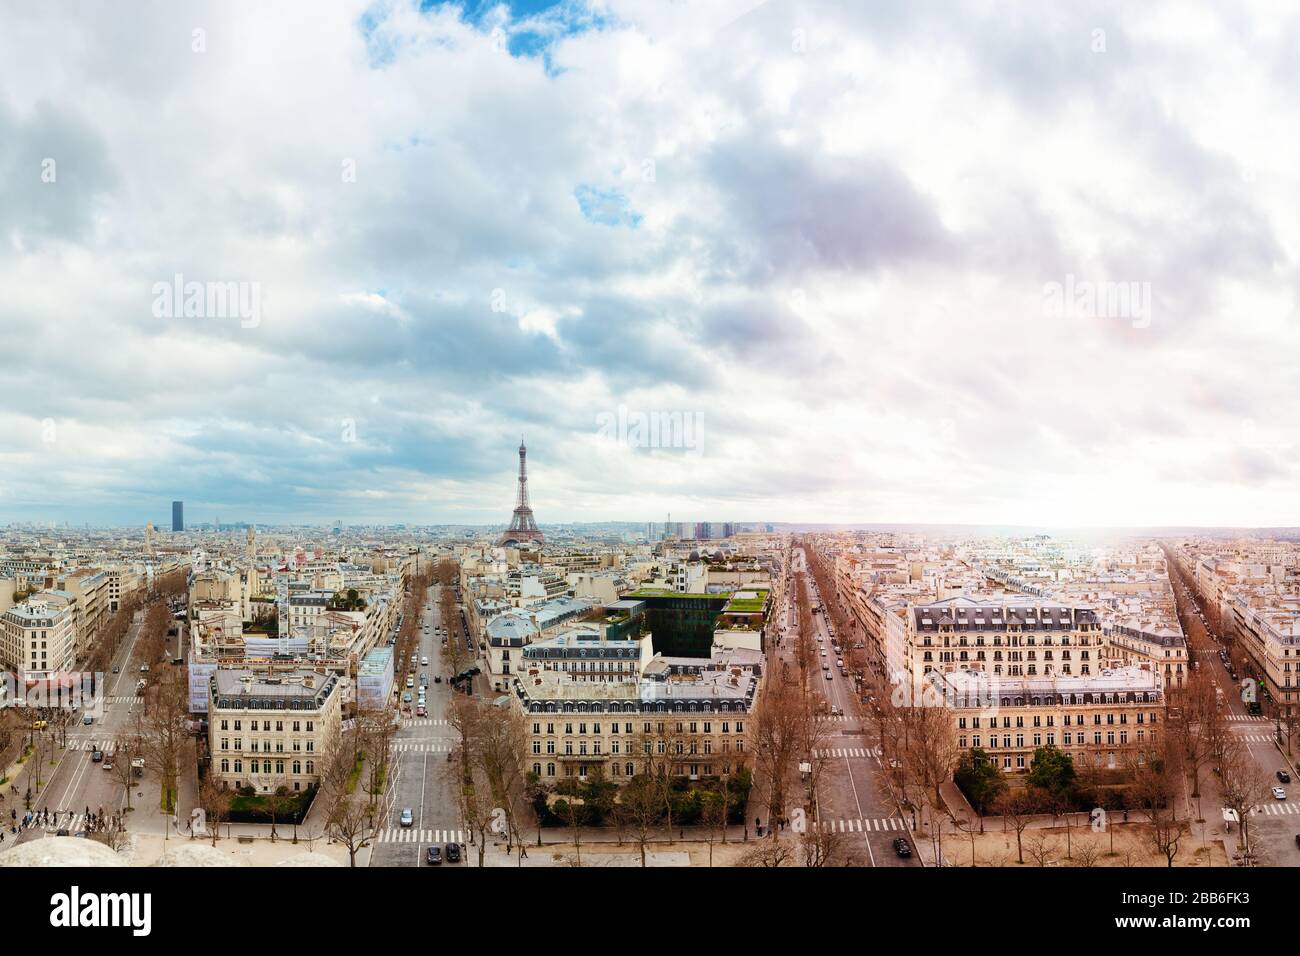 Panoramic urban skyline of Haussmanian buildings and Eiffel Tower in the city of Paris, France Stock Photo